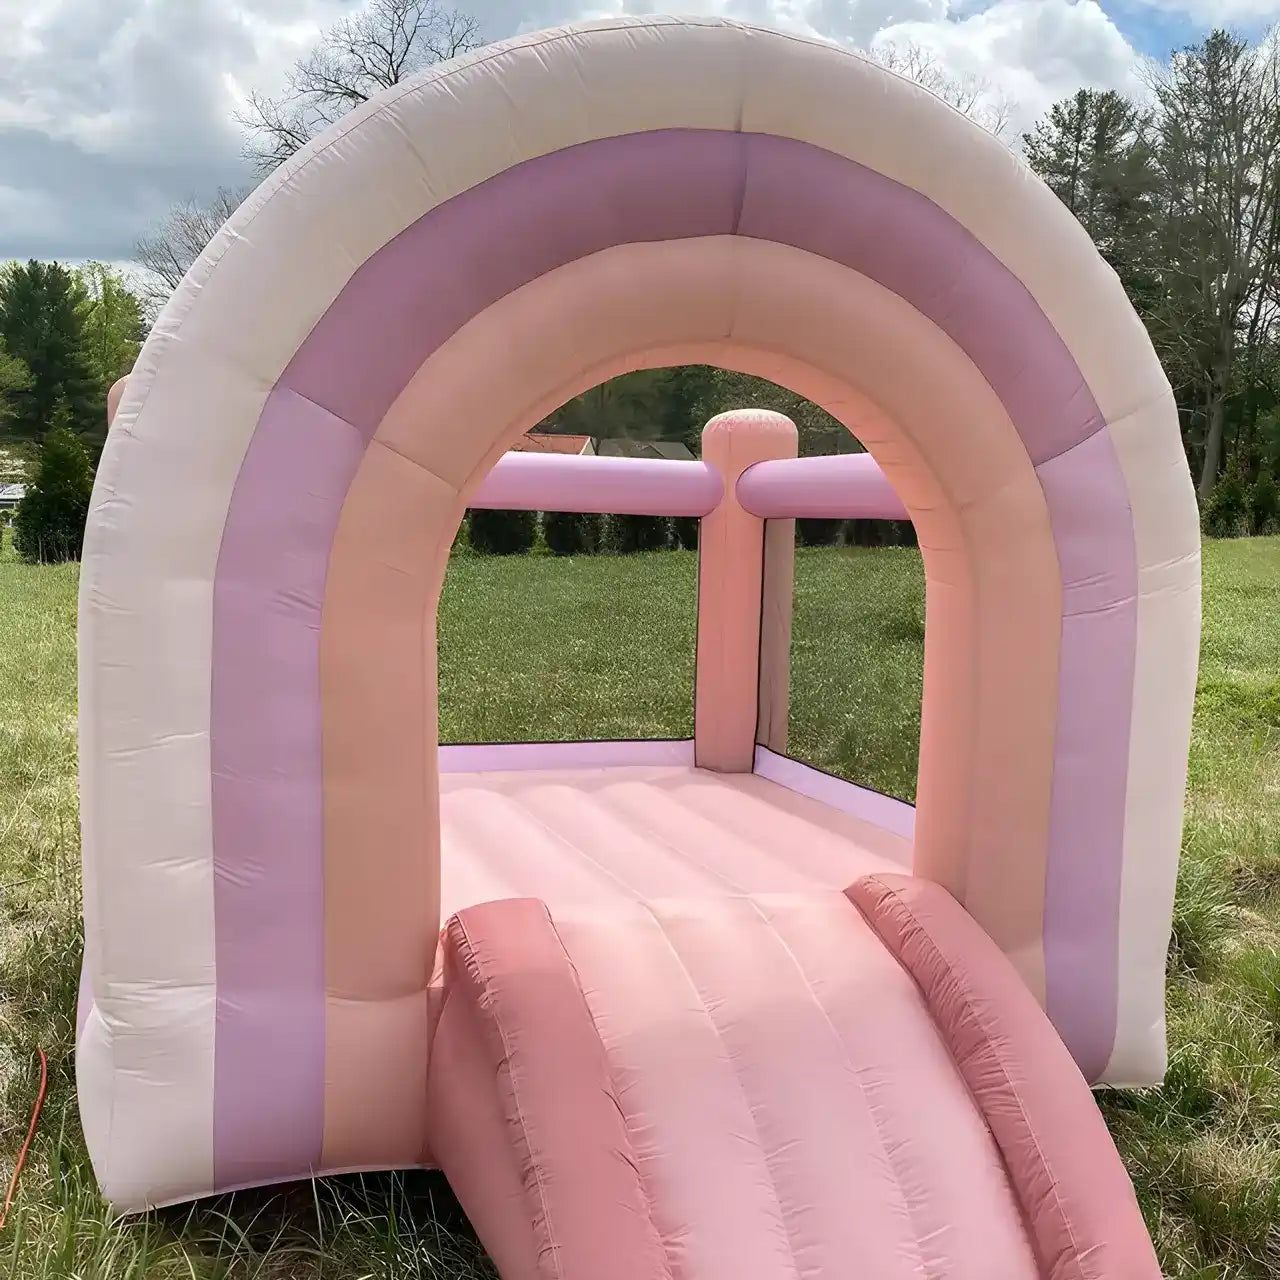 Pastel pink mini bounce house for commercial rental businesses